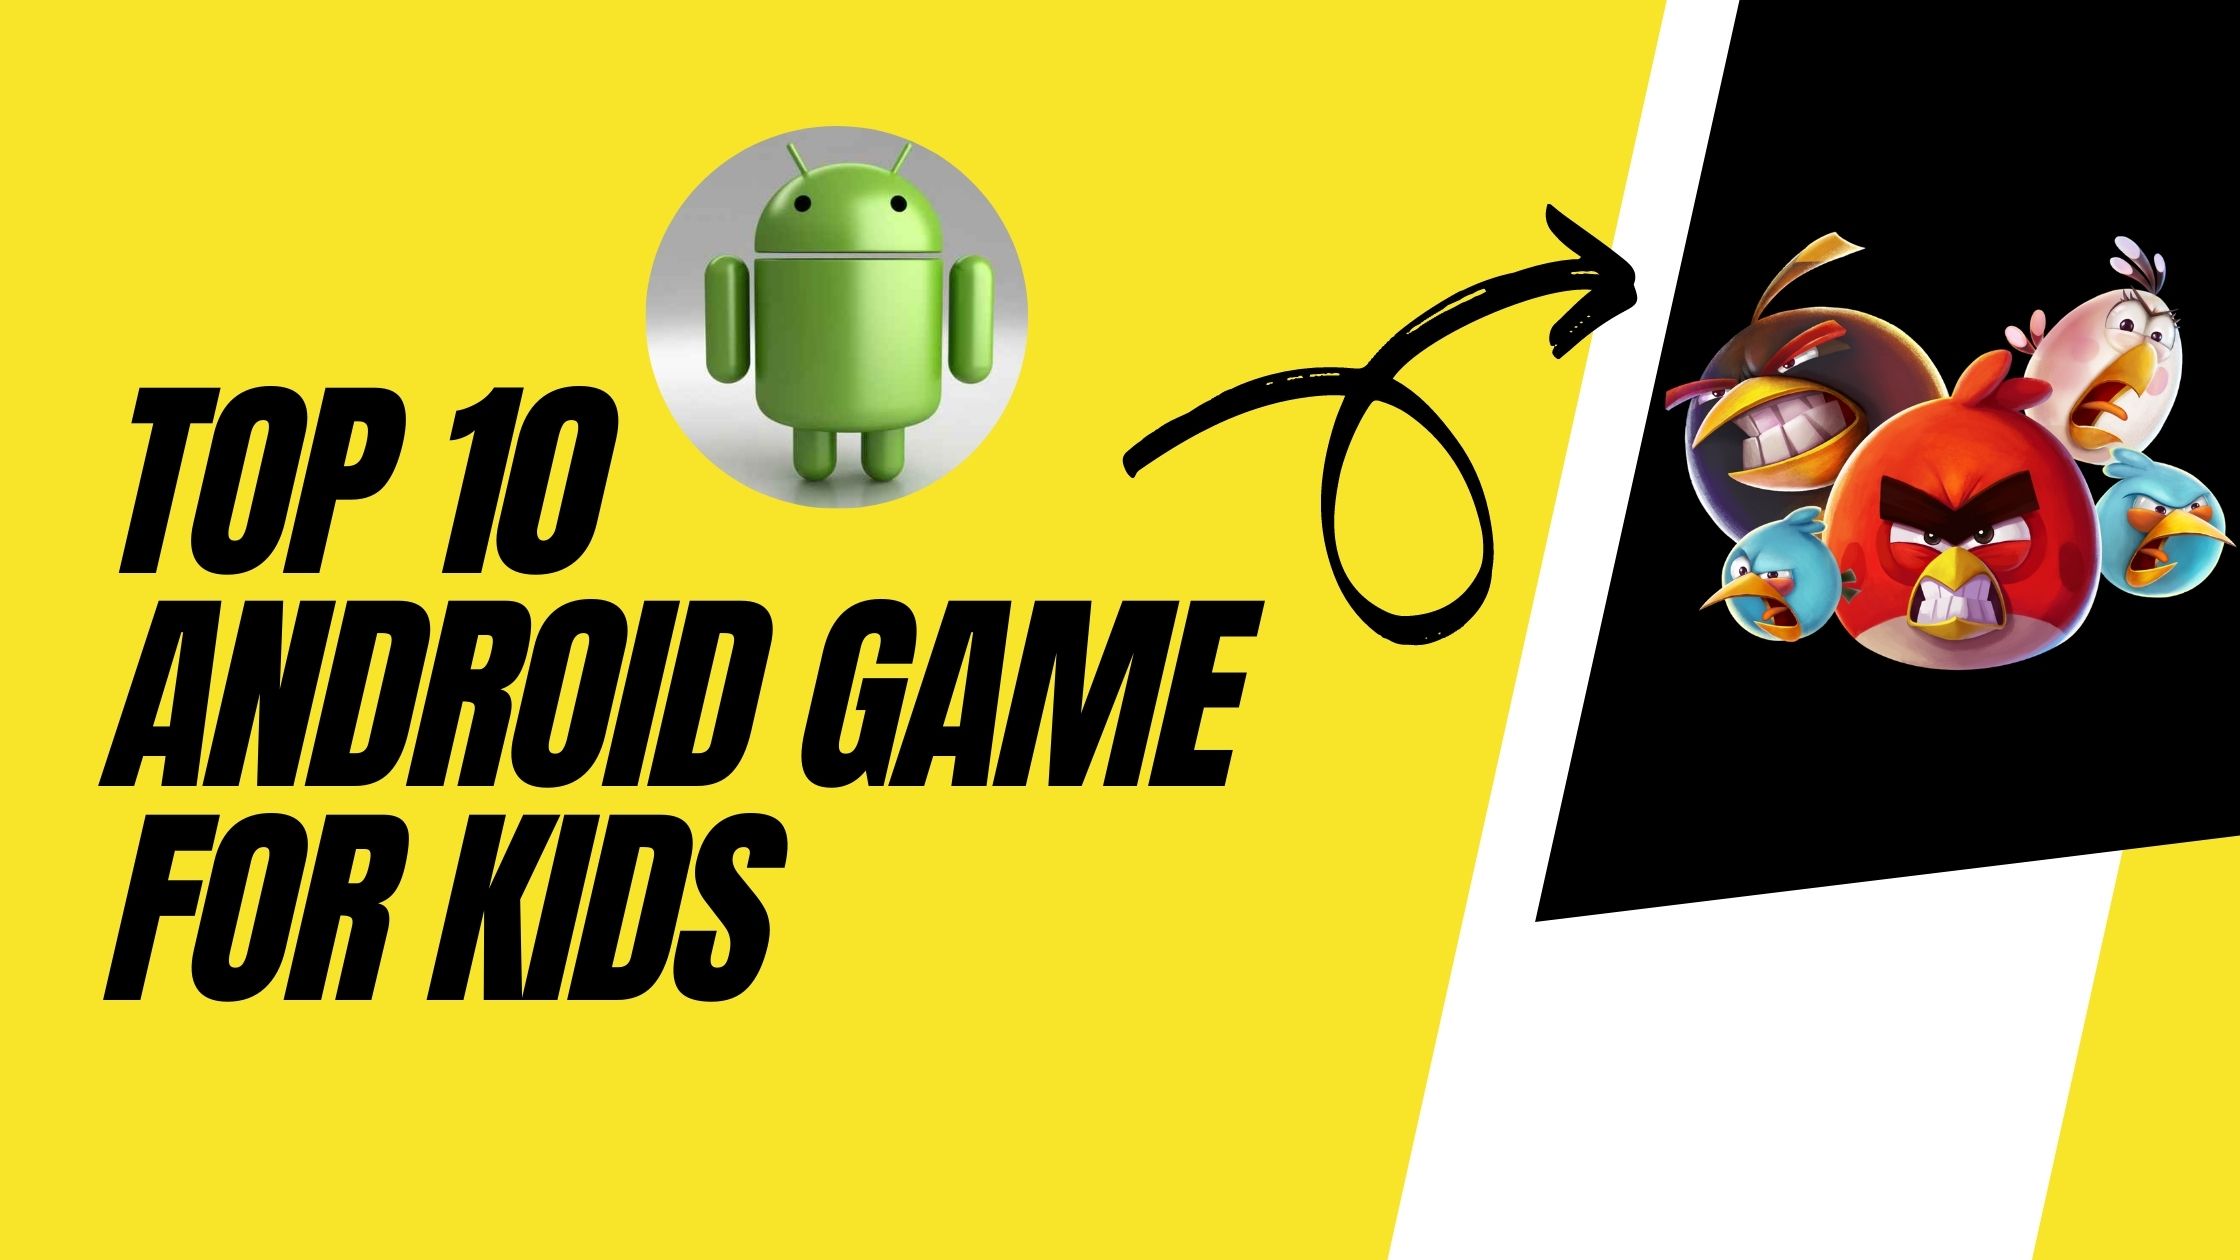 Android game for kids